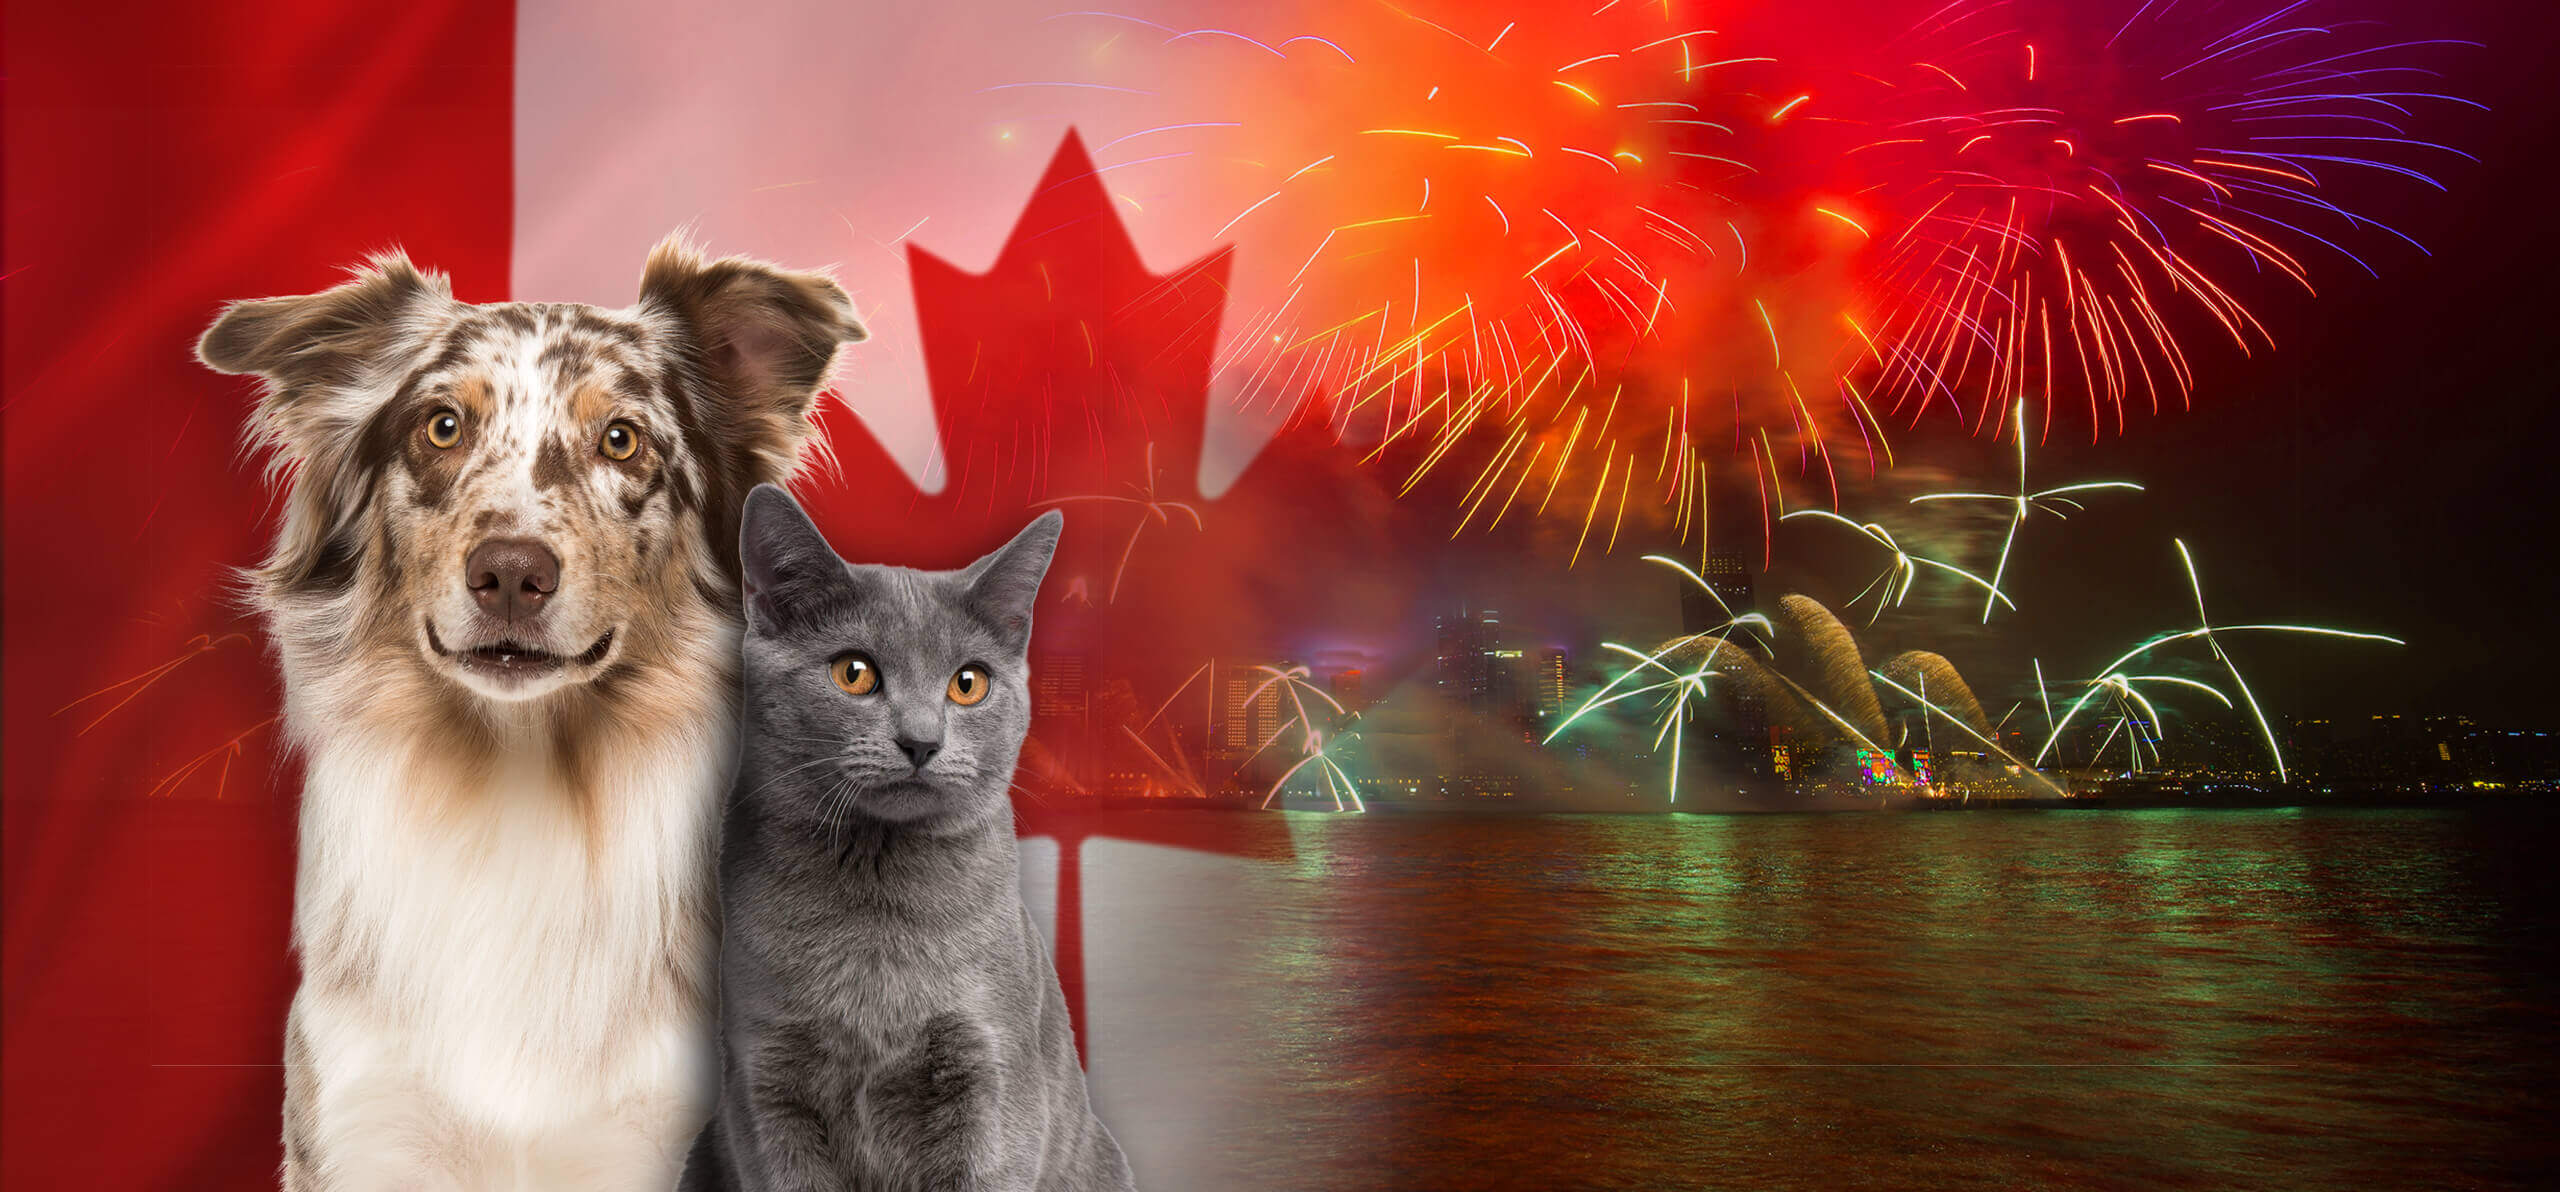 dog and cat with a canadian flag background